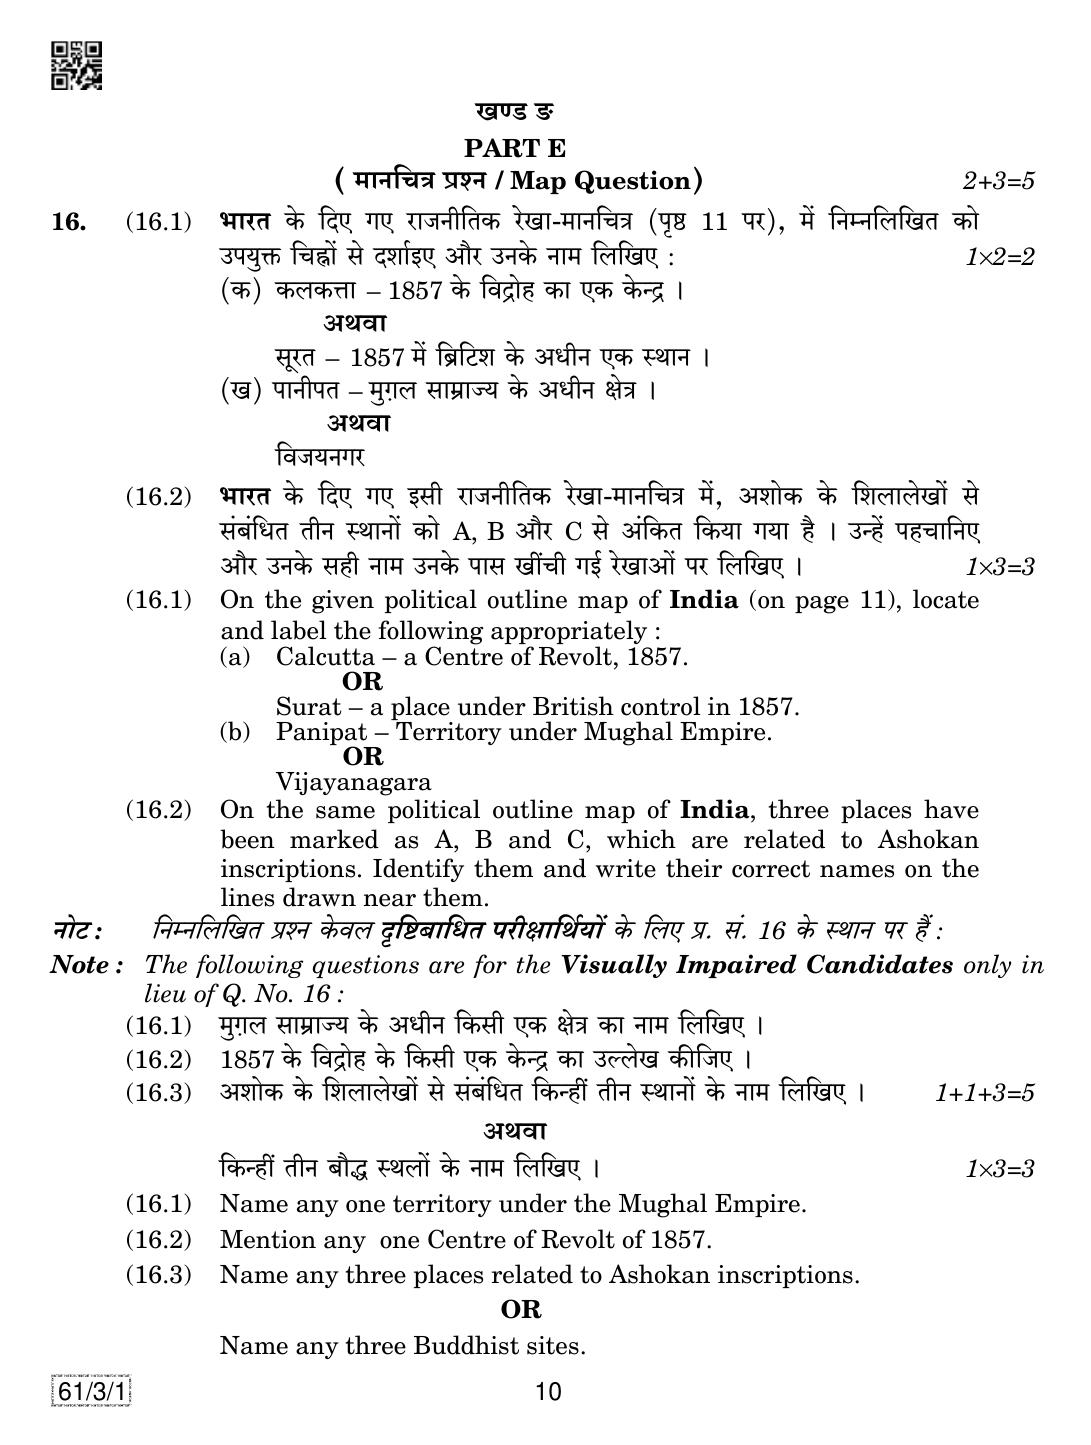 CBSE Class 12 61-3-1 History 2019 Question Paper - Page 10